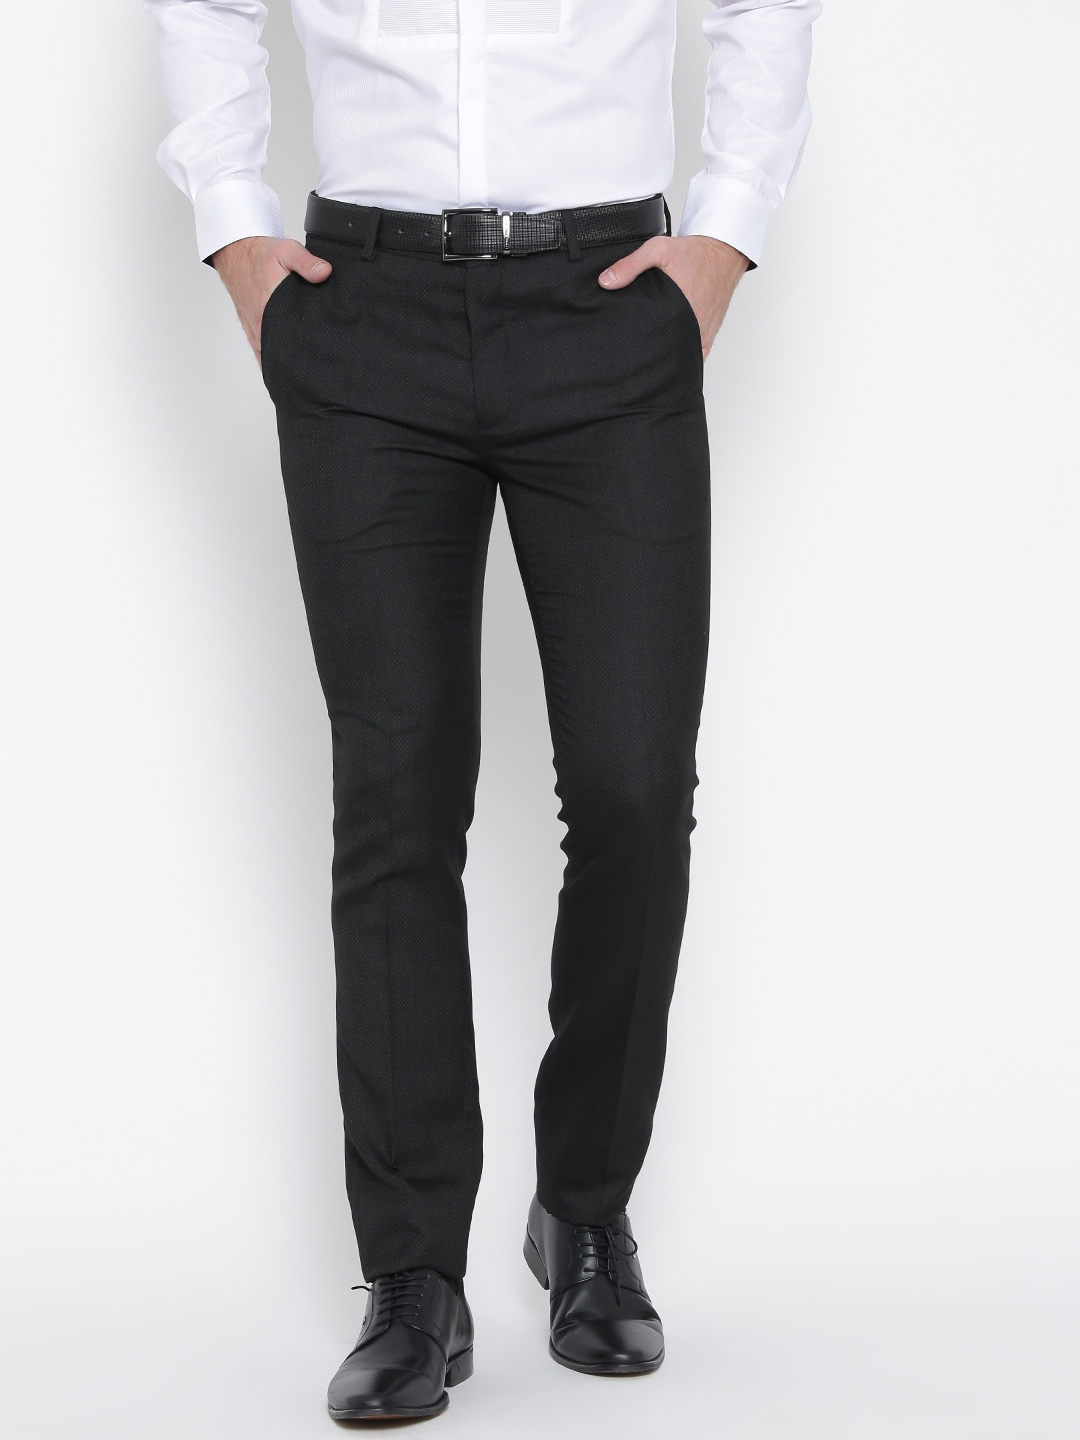 100 Org PREVILAGE CLUB URBANAJOHN MILLERGIOVANI Mens Formal Trousers  With Mrp  Brand Mentioned Bill WHOLESALE ONLY  Clothing in Delhi  177711646  Clickindia